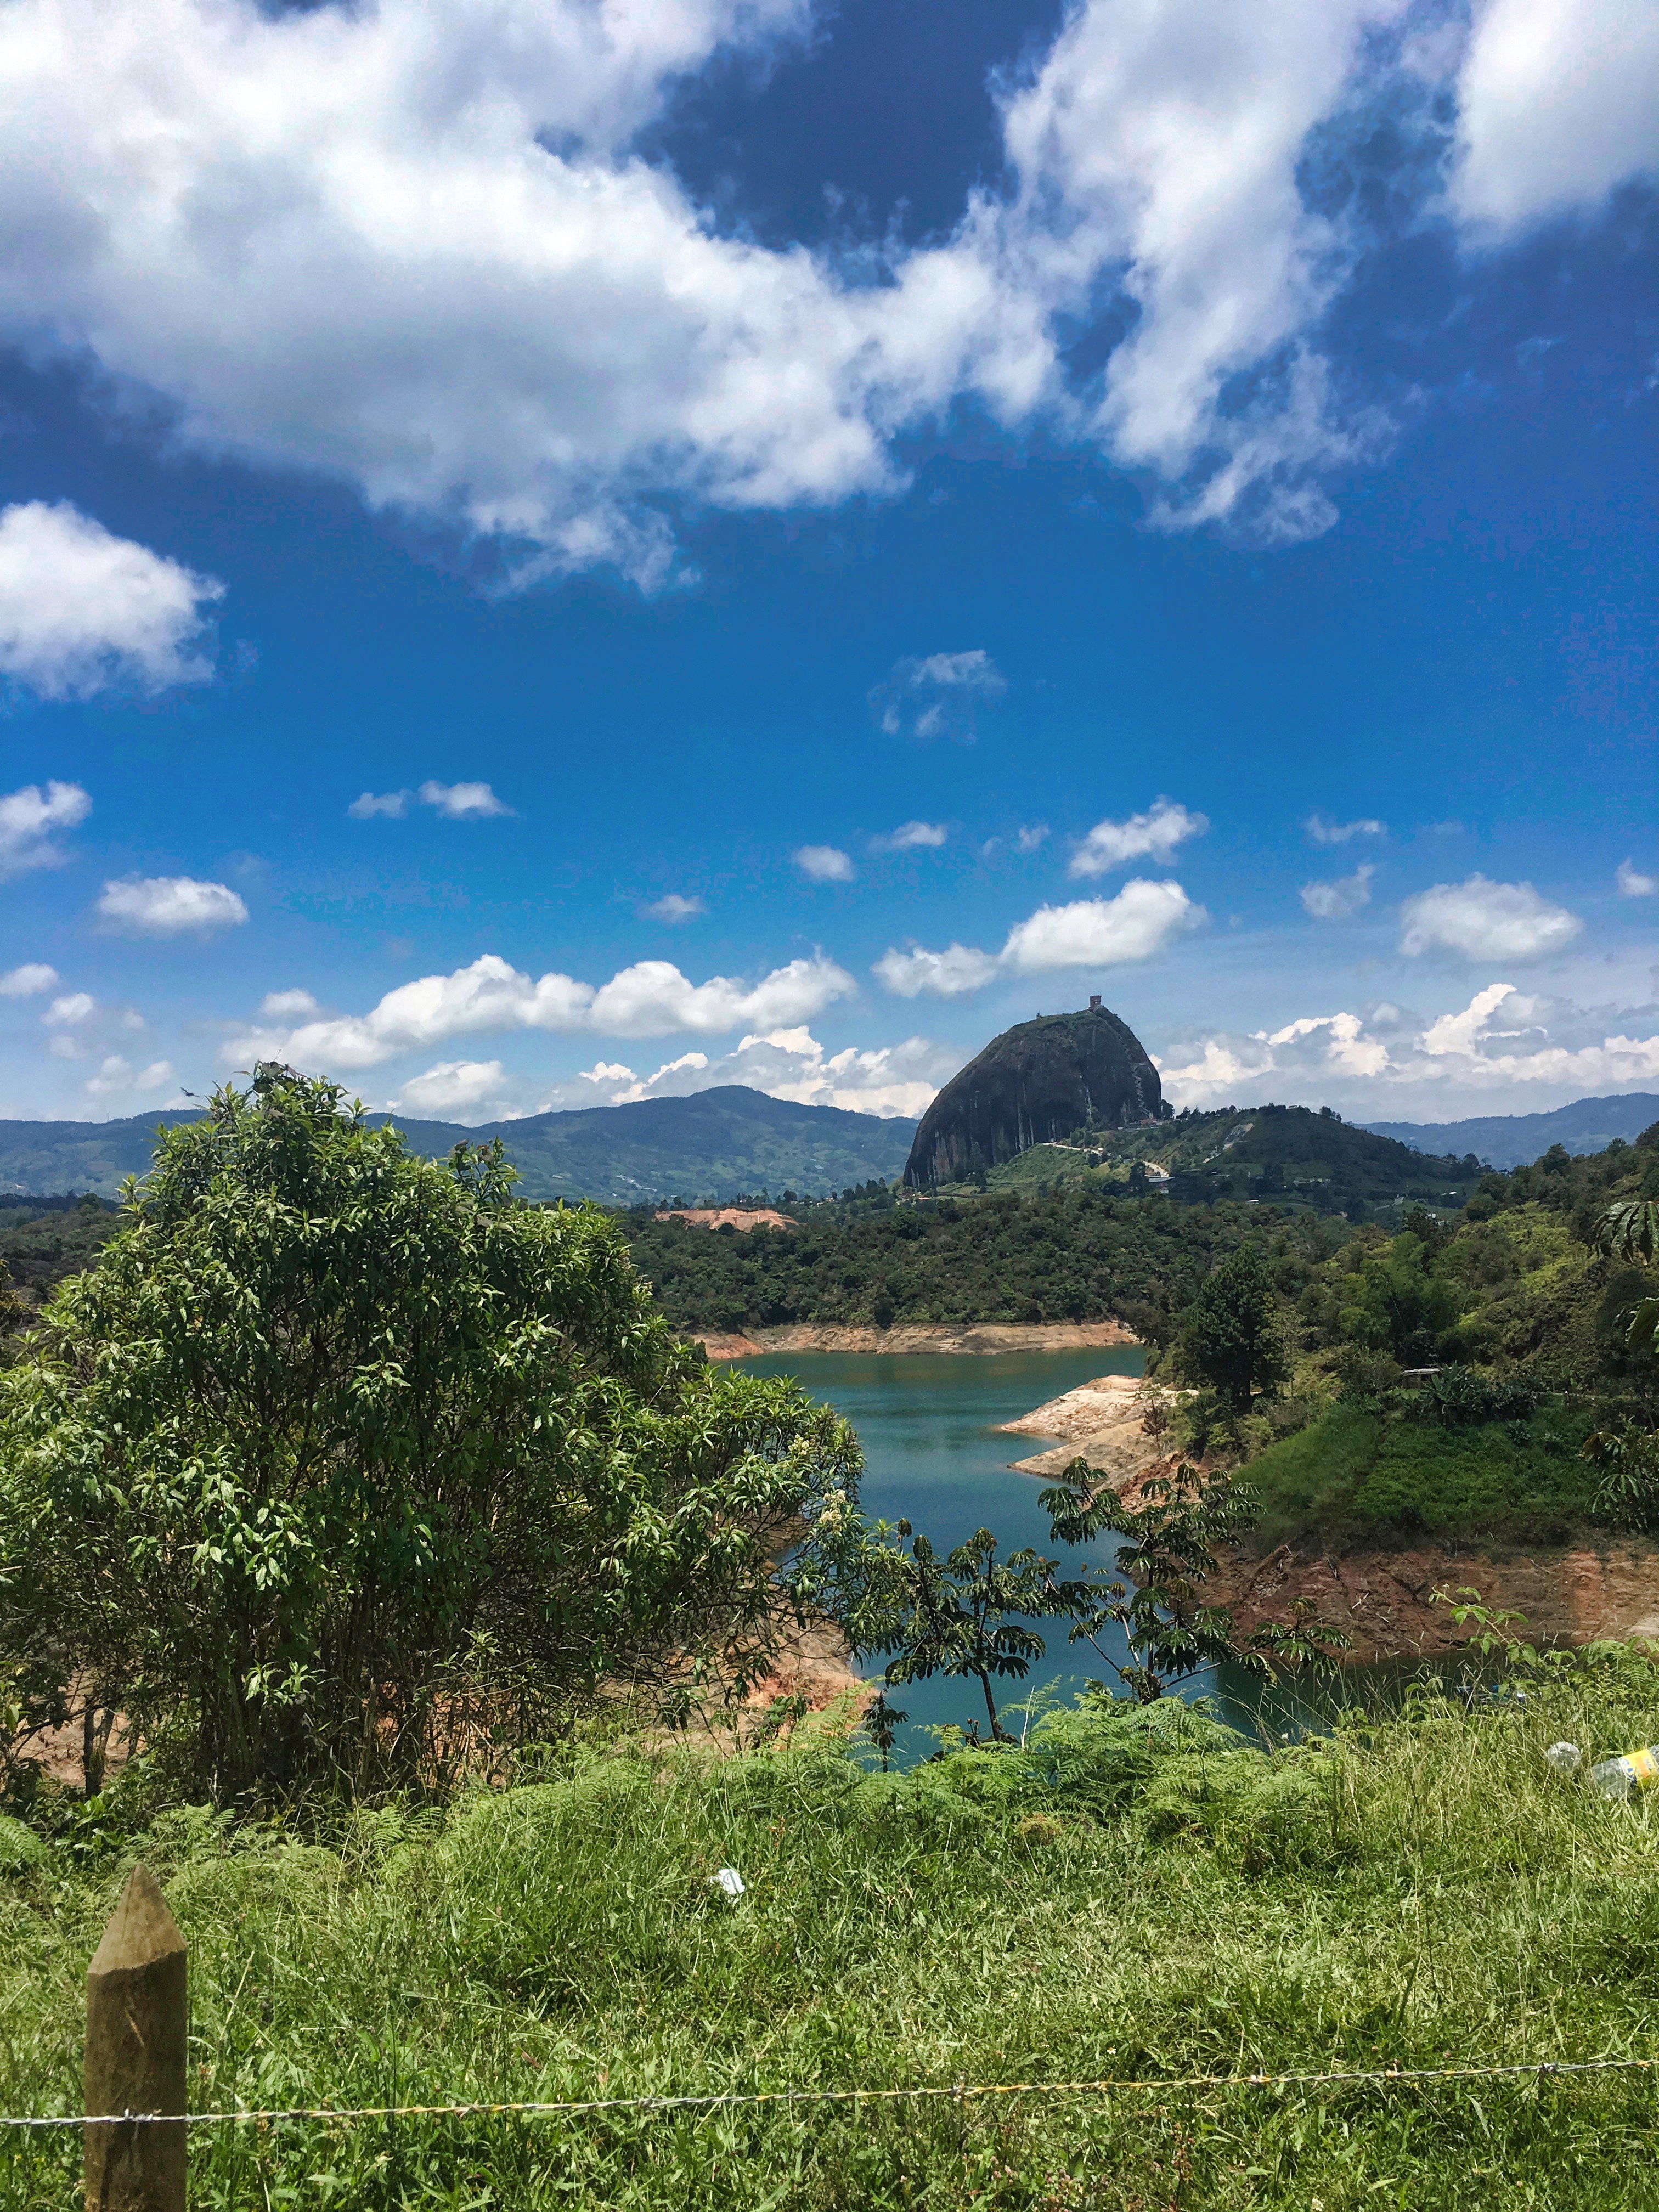 Two Travel The World - Guatapé and La Piedra day trip from Medellin